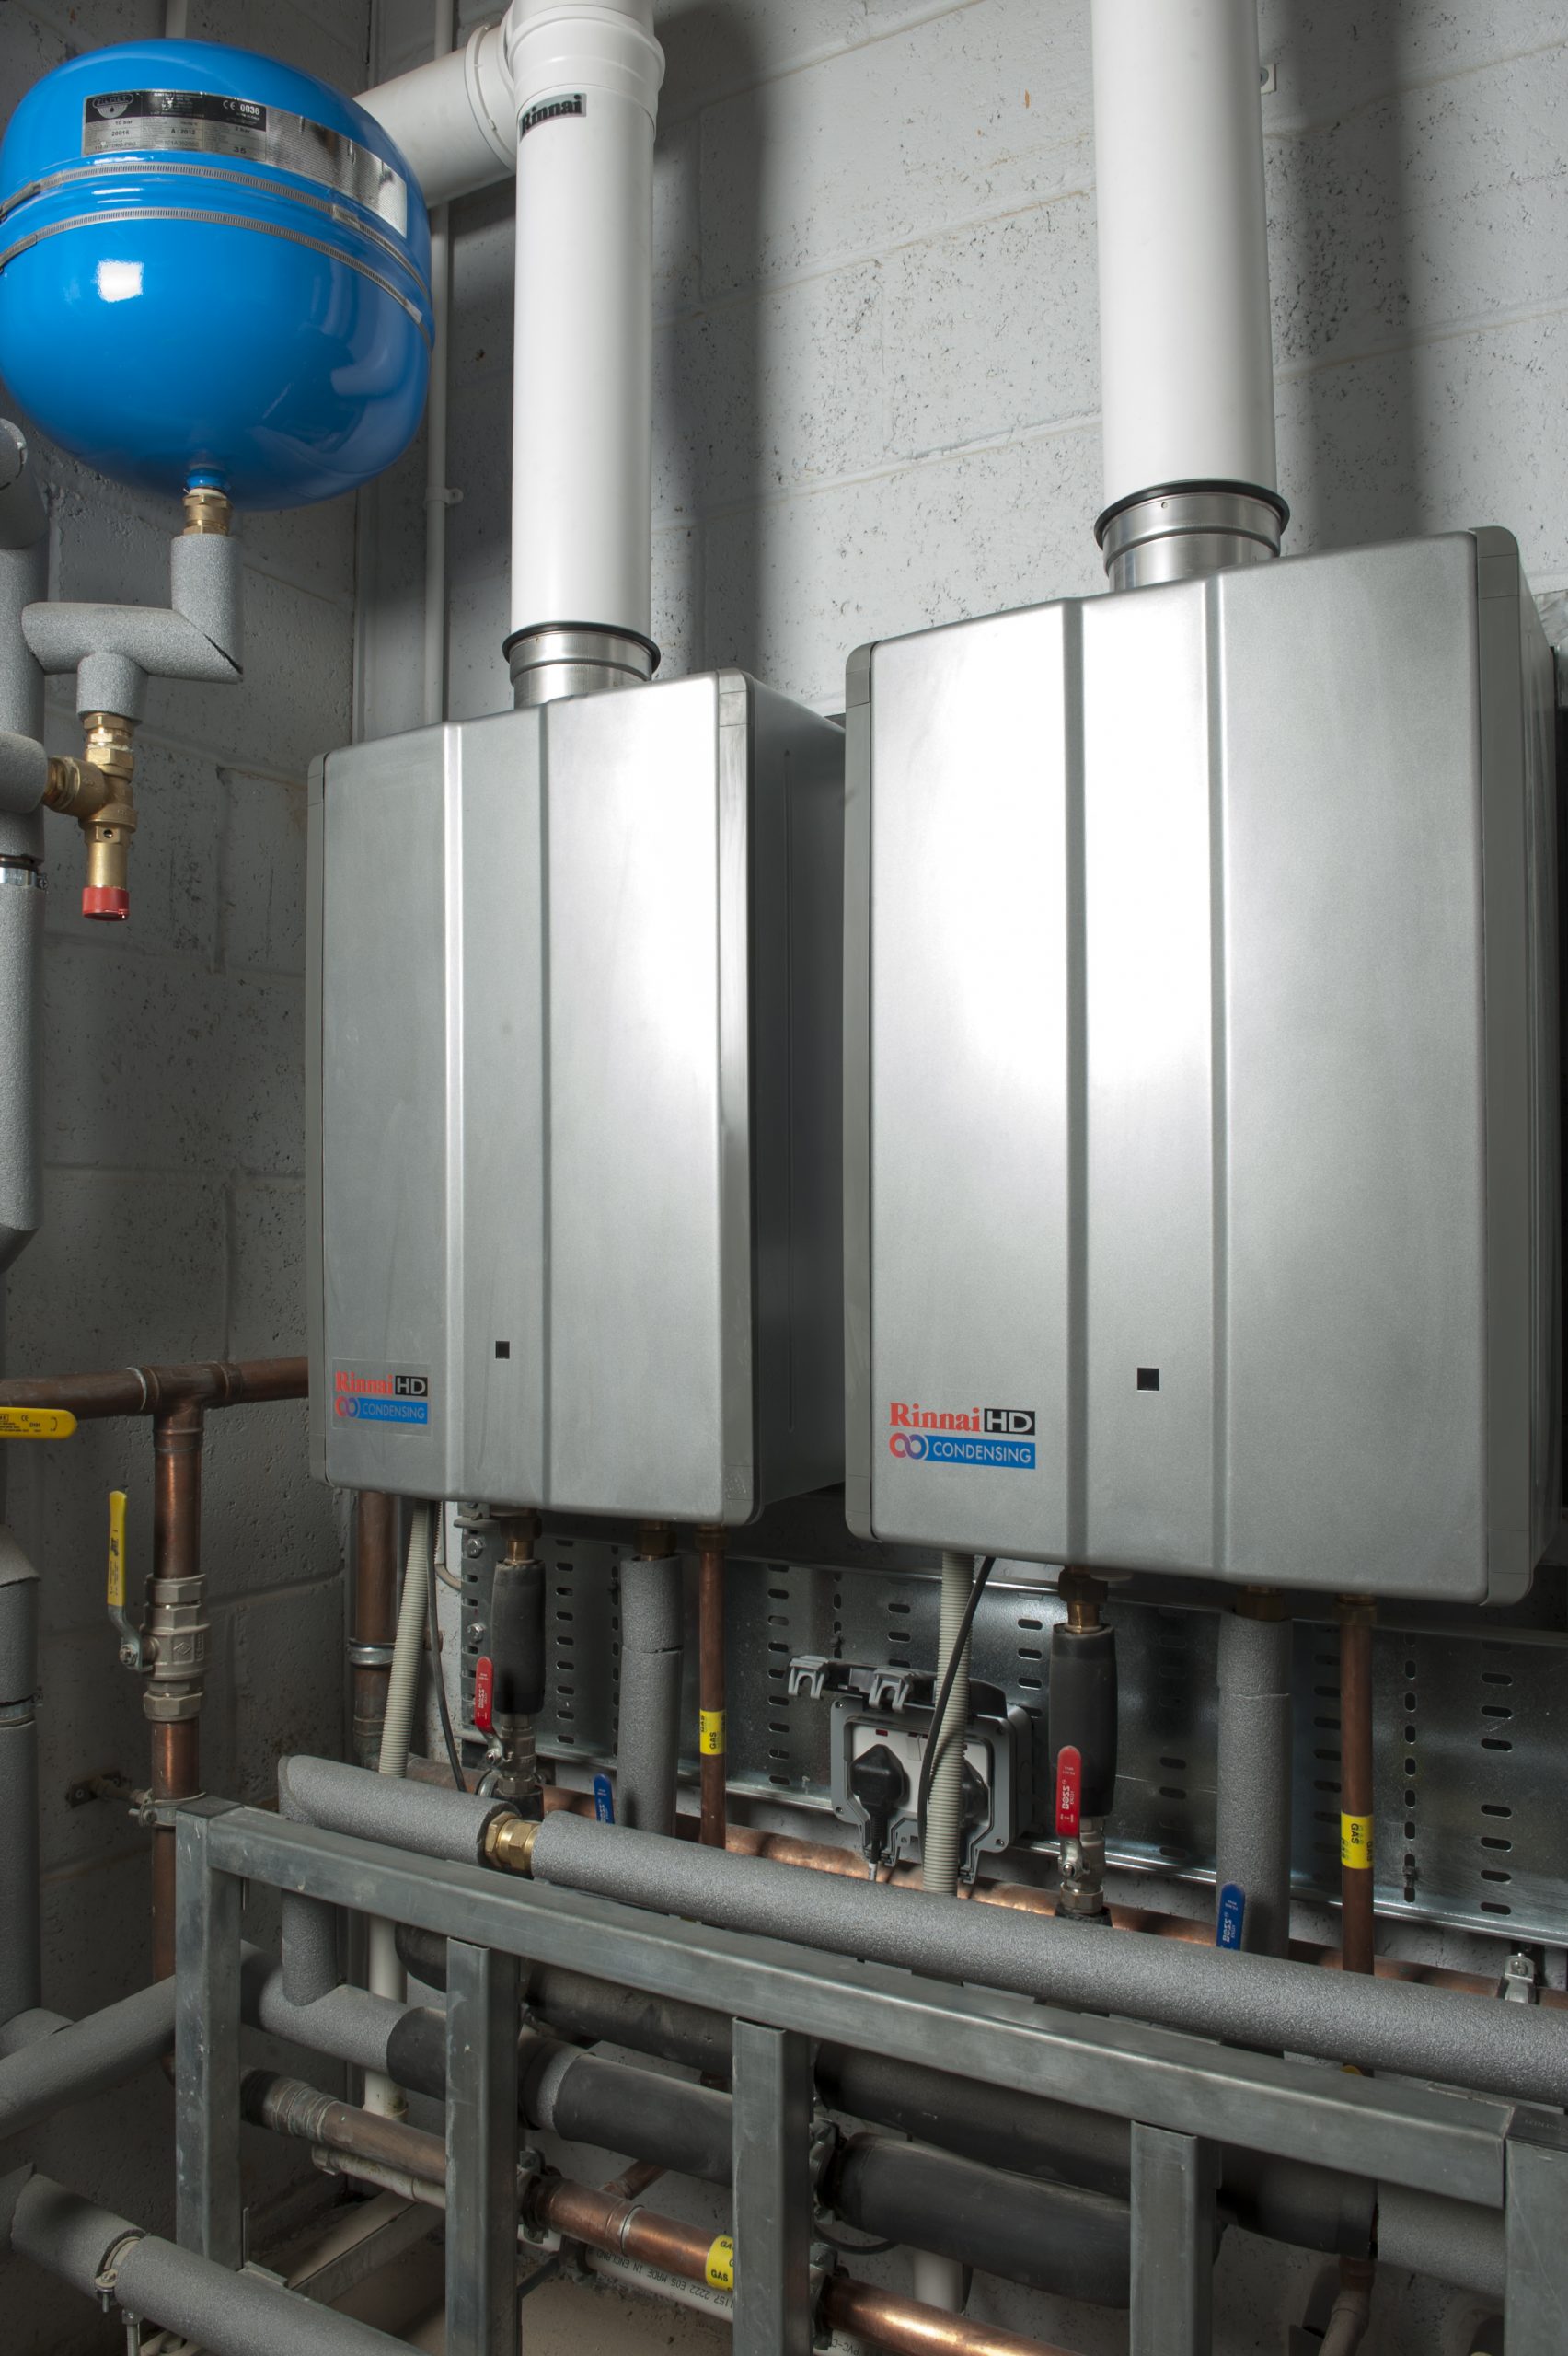 RINNAI HOT WATER ON DEMAND – FUEL, ENERGY, ENVIRONMENT AND FINANCE EFFICIENT – AND NOW EASY TO CHOOSE @rinnai_uk